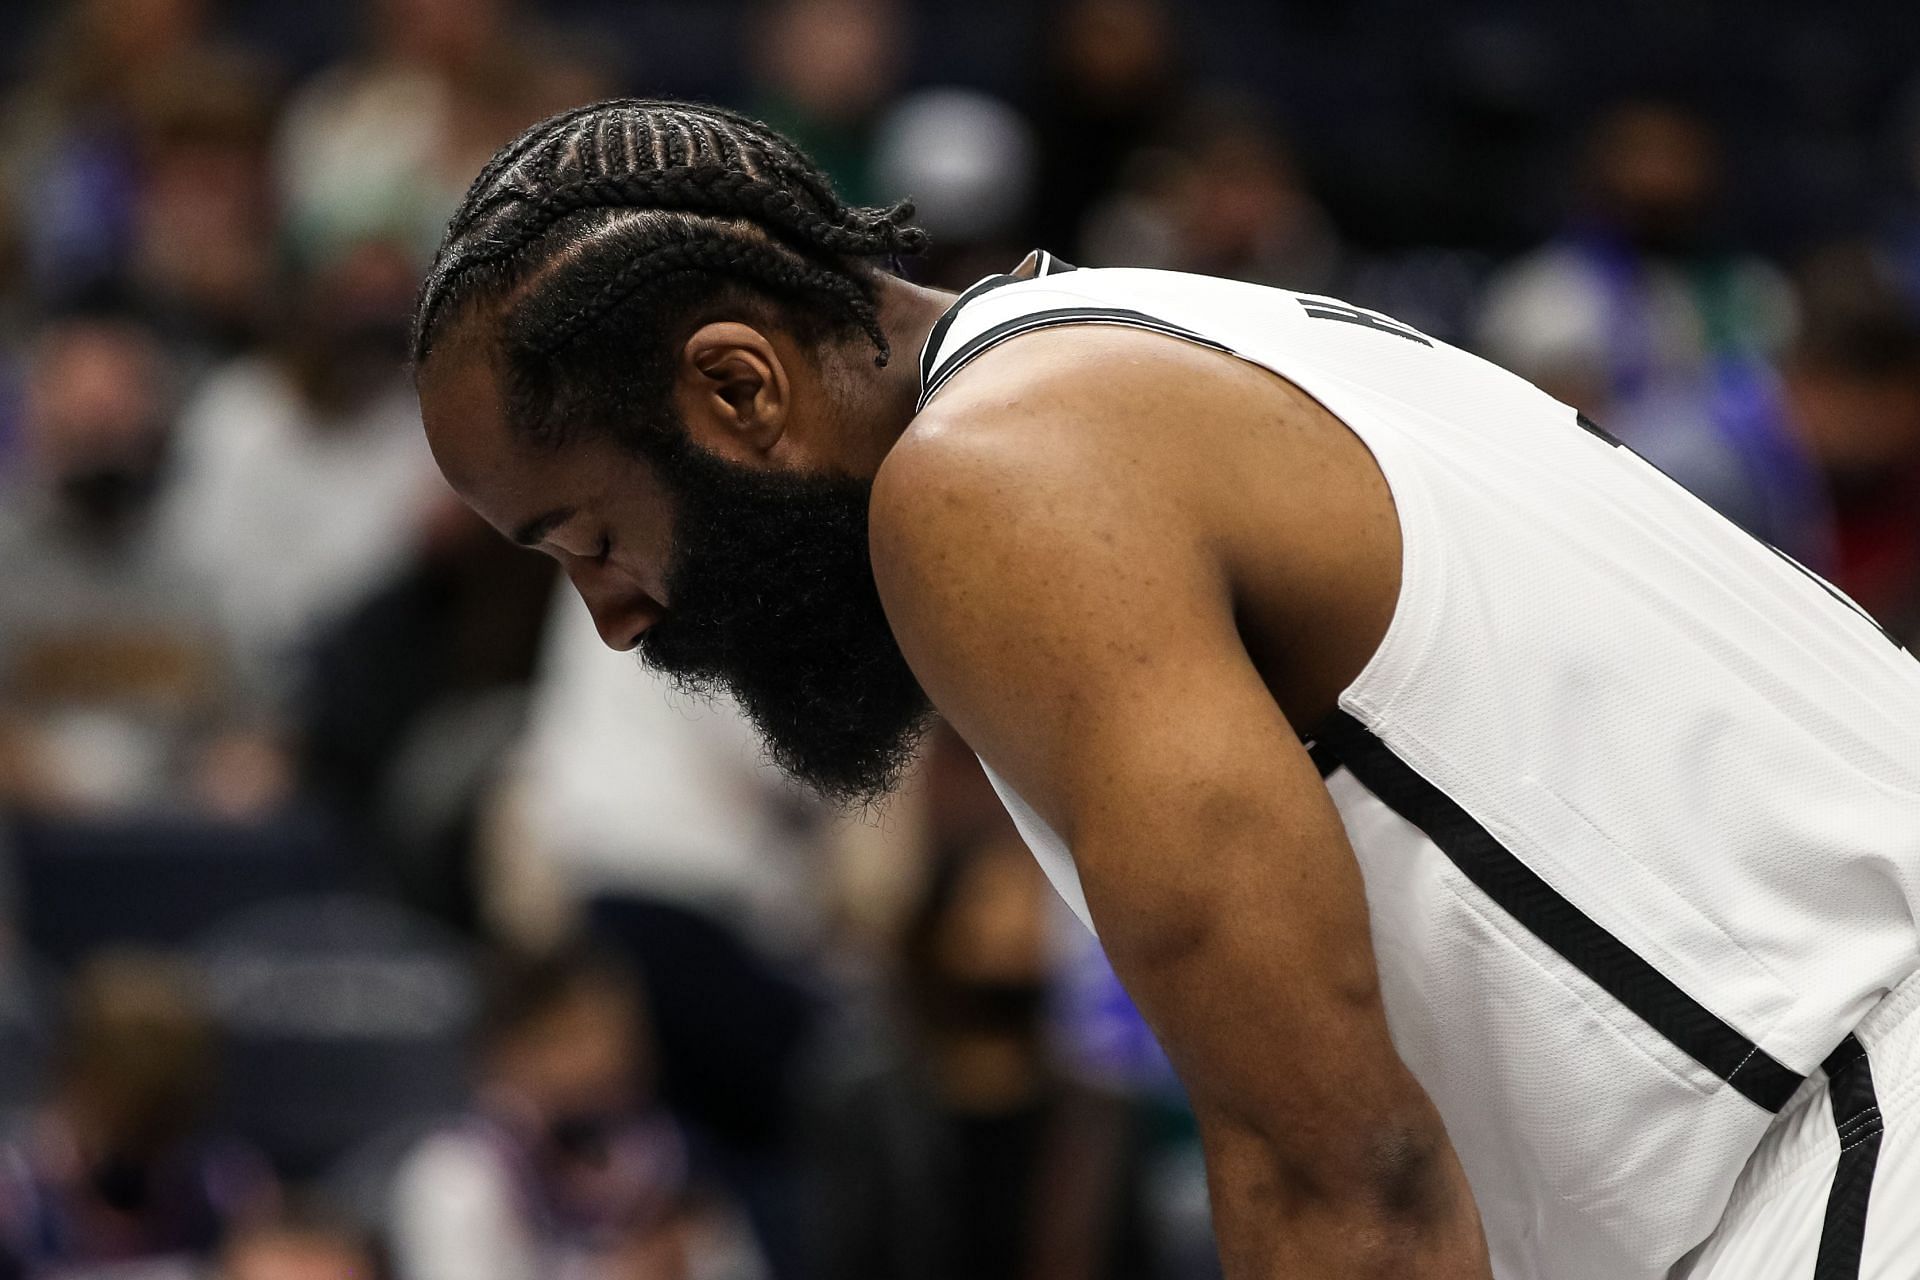 Brooklyn Nets head coach Steve Nash is unhappy that James Harden is not getting the benefit of the whistle this season.